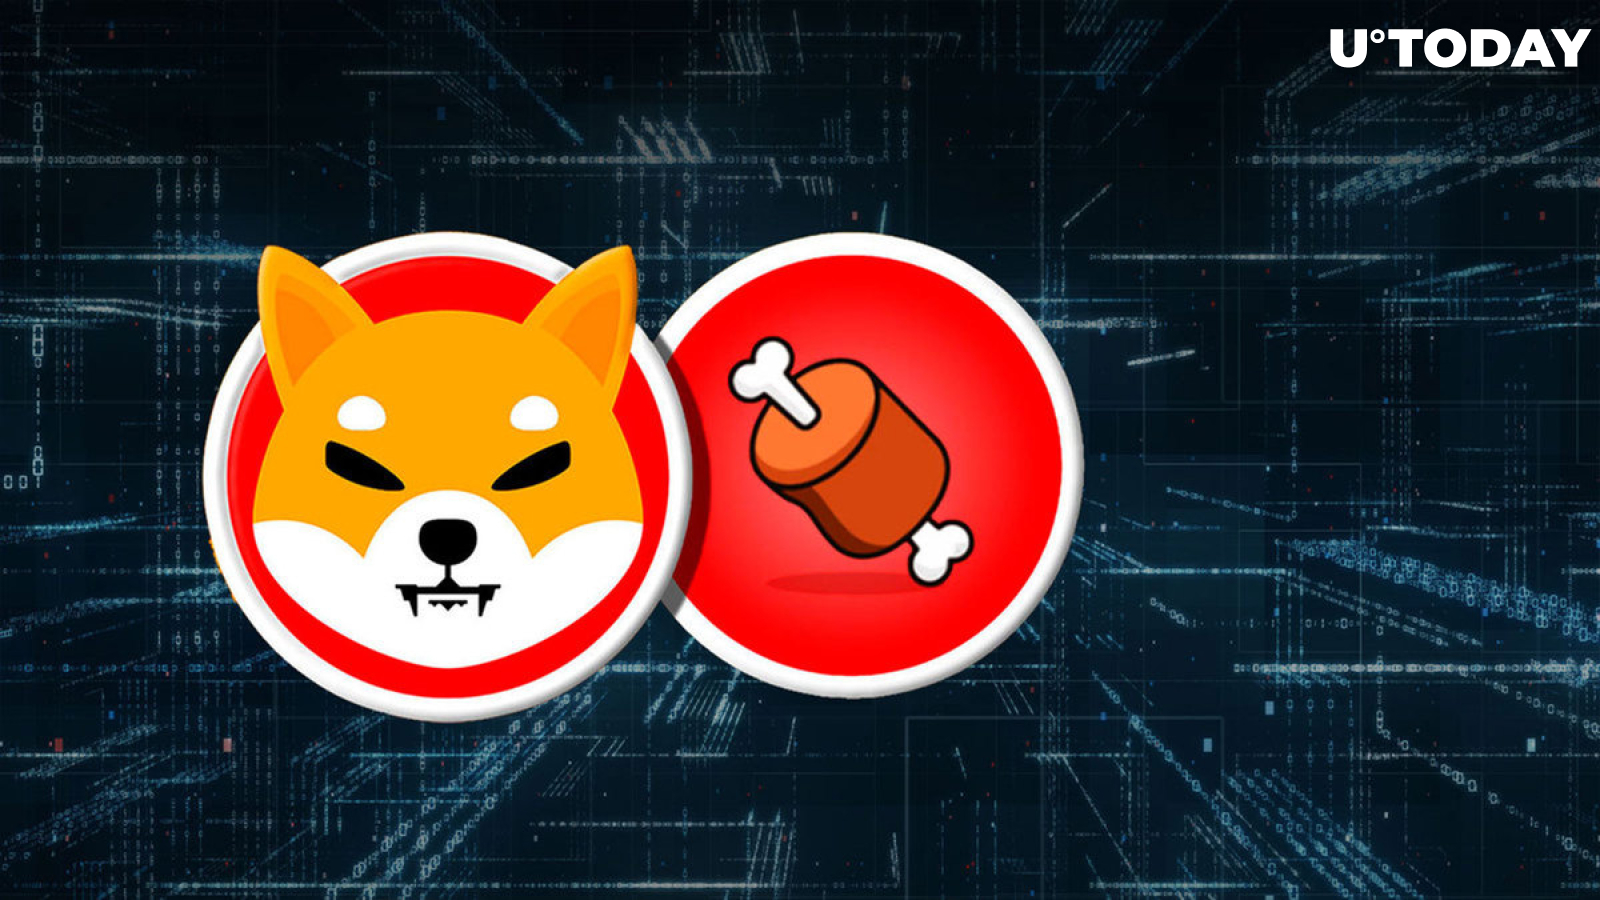 Shiba Inu's SHIB and BONE Receive New Killer Feature in This App